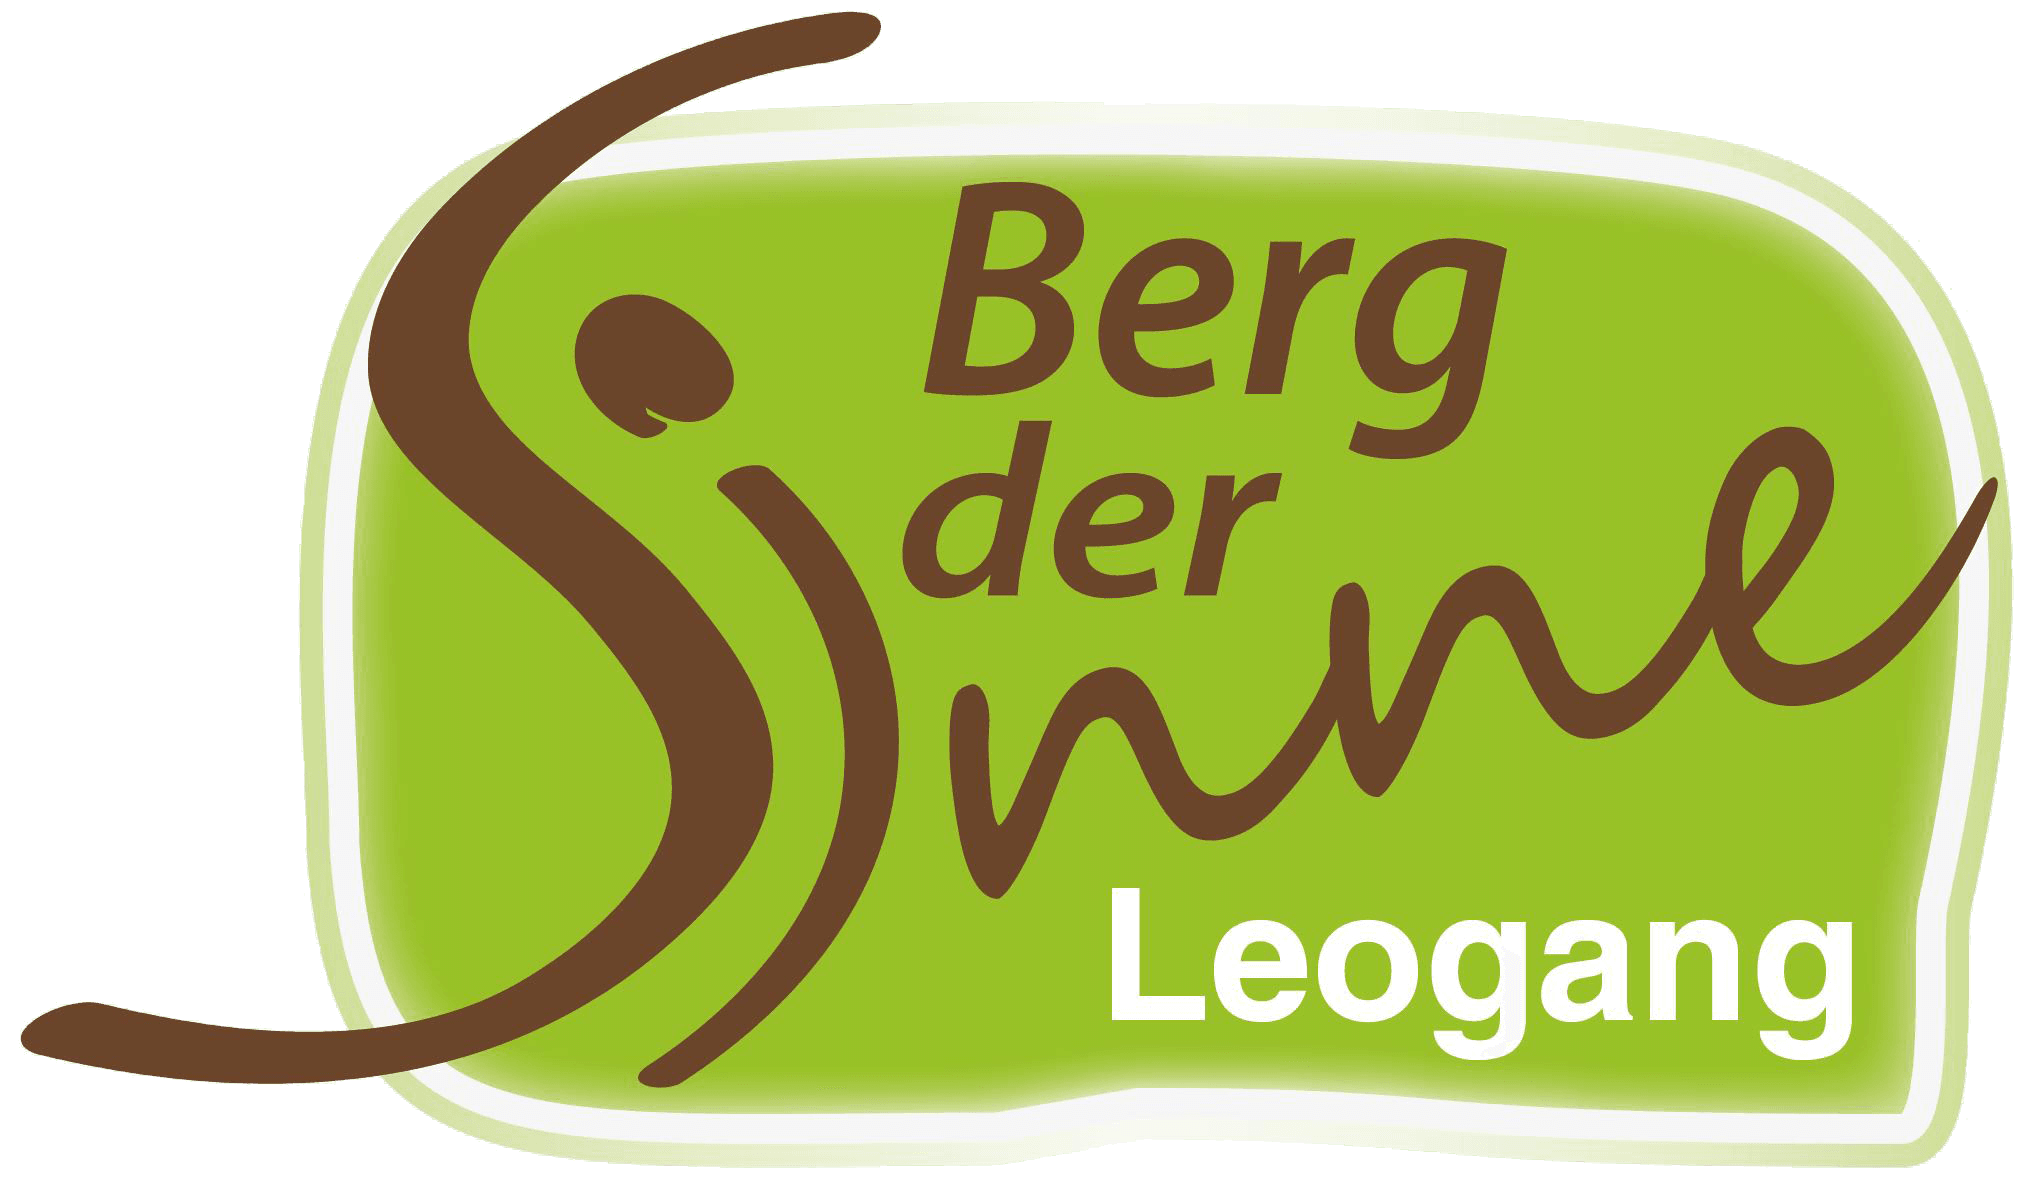 Image not available: 'bergDerSinne.png'